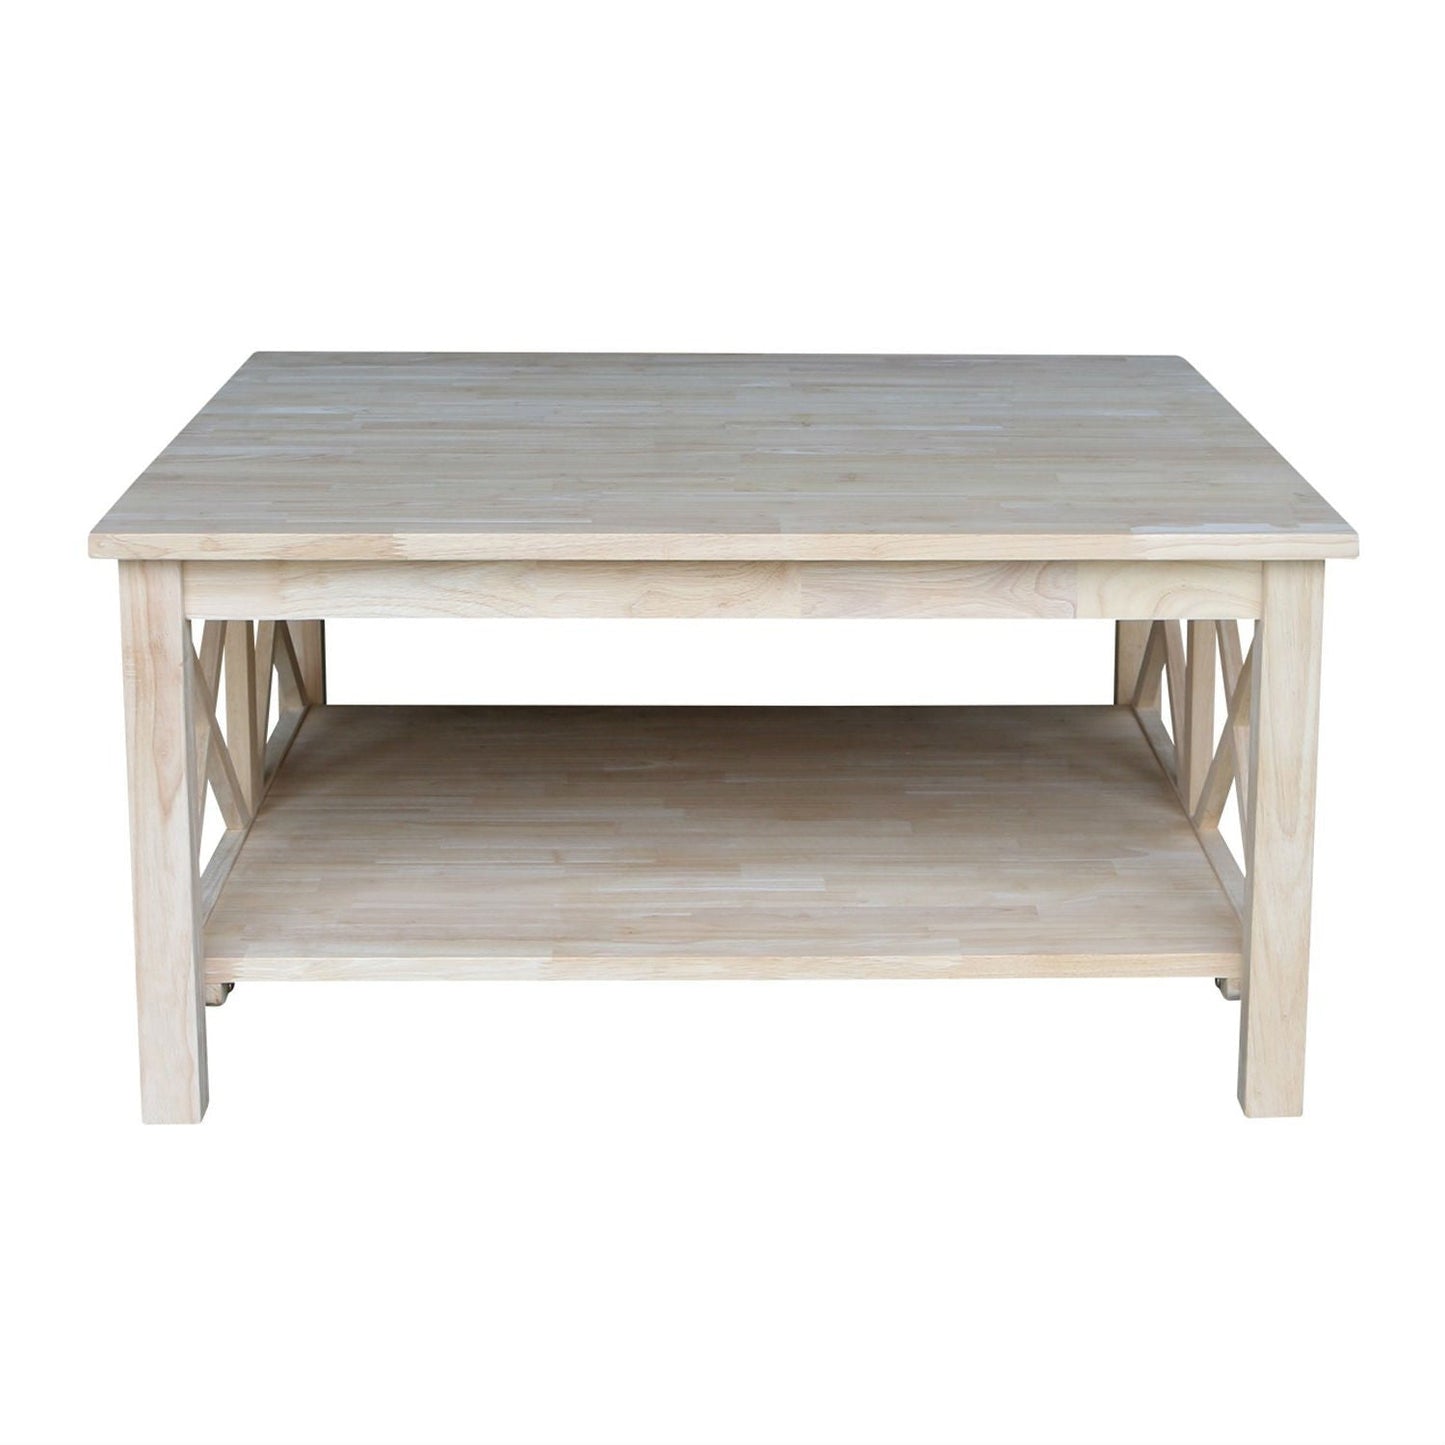 Living Room > Coffee Tables - Square Unfinished Solid Wood Coffee Table With Bottom Shelf